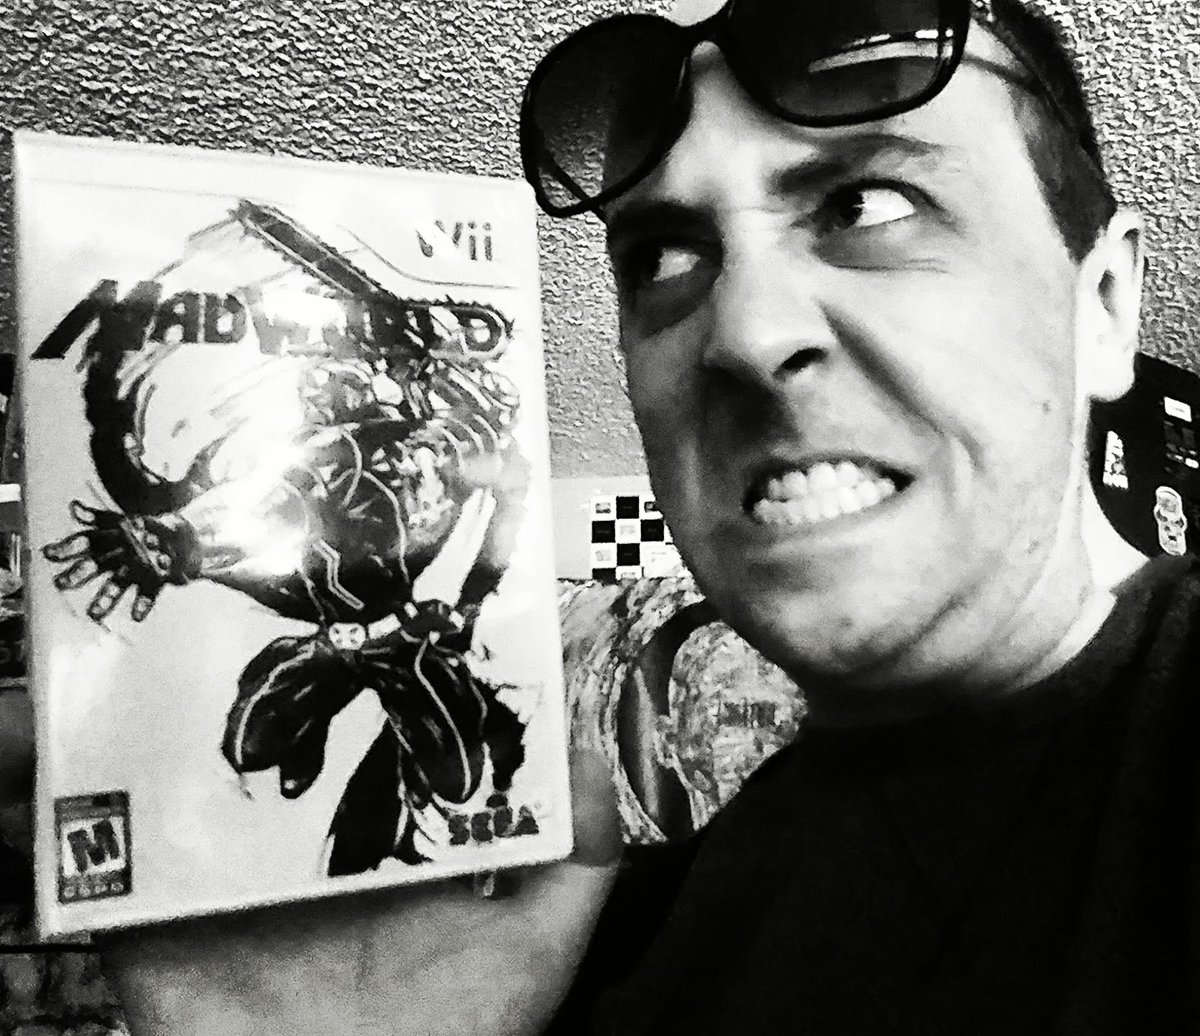 I'm so MAD! And I blame the WORLD! I'll have to play some #MadWorld on the Wii to get my anger out!

Come join the Lunar Nation!
twitch.tv/grimpengaming

#twitchaffiliate #gamer #videogames #SupportSmallStreamers #sega #platinumgames #wii #nintendo #gregproops #johndimaggio